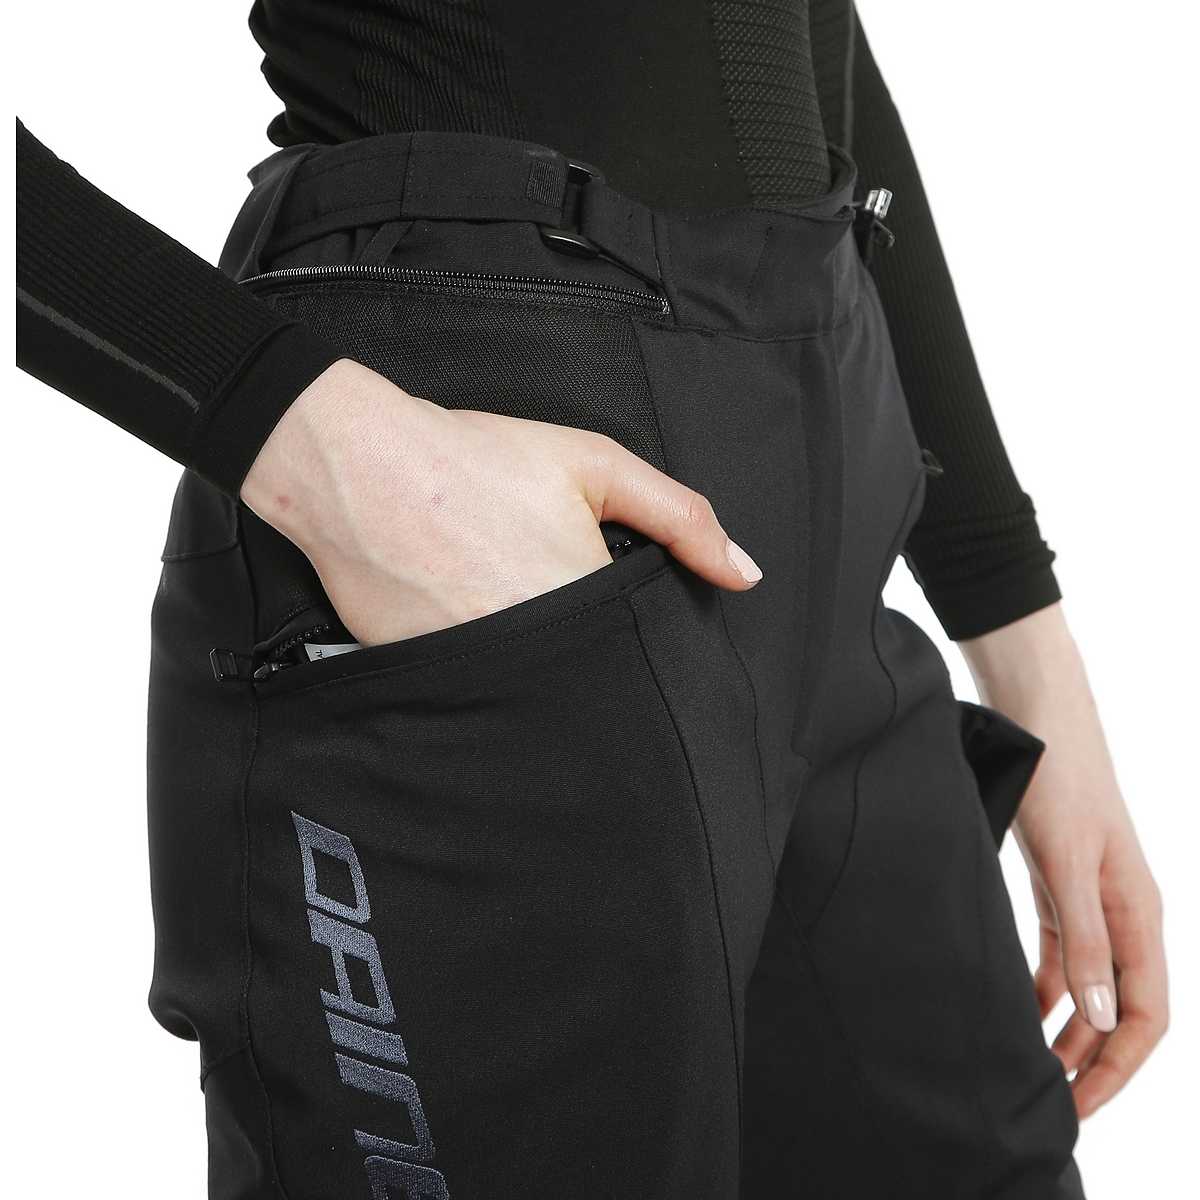 https://data.outletmoto.eu/imgprodotto/womens-motorcycle-pants-in-dainese-tonale-d-dry-xt-black-fabric_114217_zoom.jpg